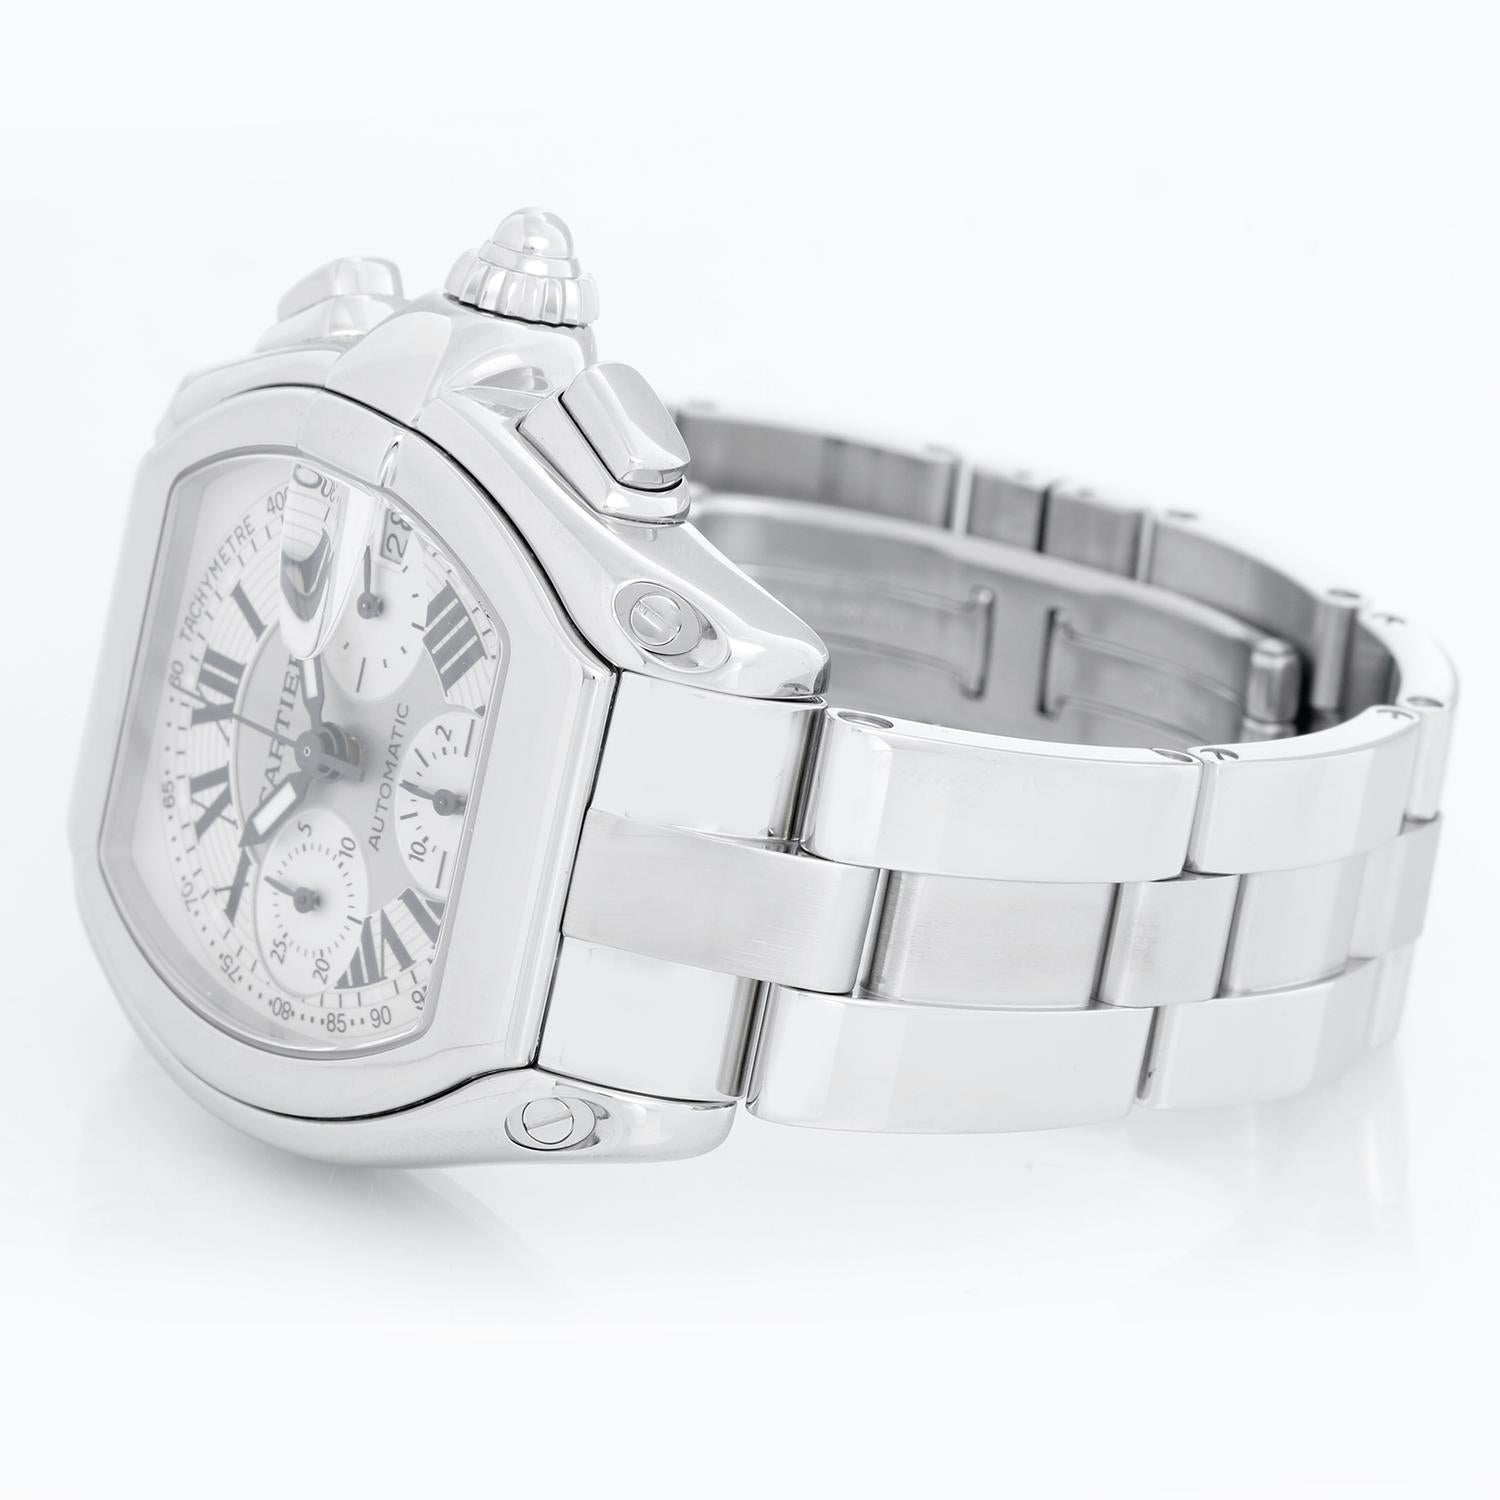 Cartier Roadster Chronograph Men's Stainless Steel Automatic Watch 2618 - Chronograph Automatic winding. Stainless steel case  (43mm x 48mm). Silver dial with Arabic numerals; date at 3 o'clock. Stainless steel Cartier Roadster bracelet with